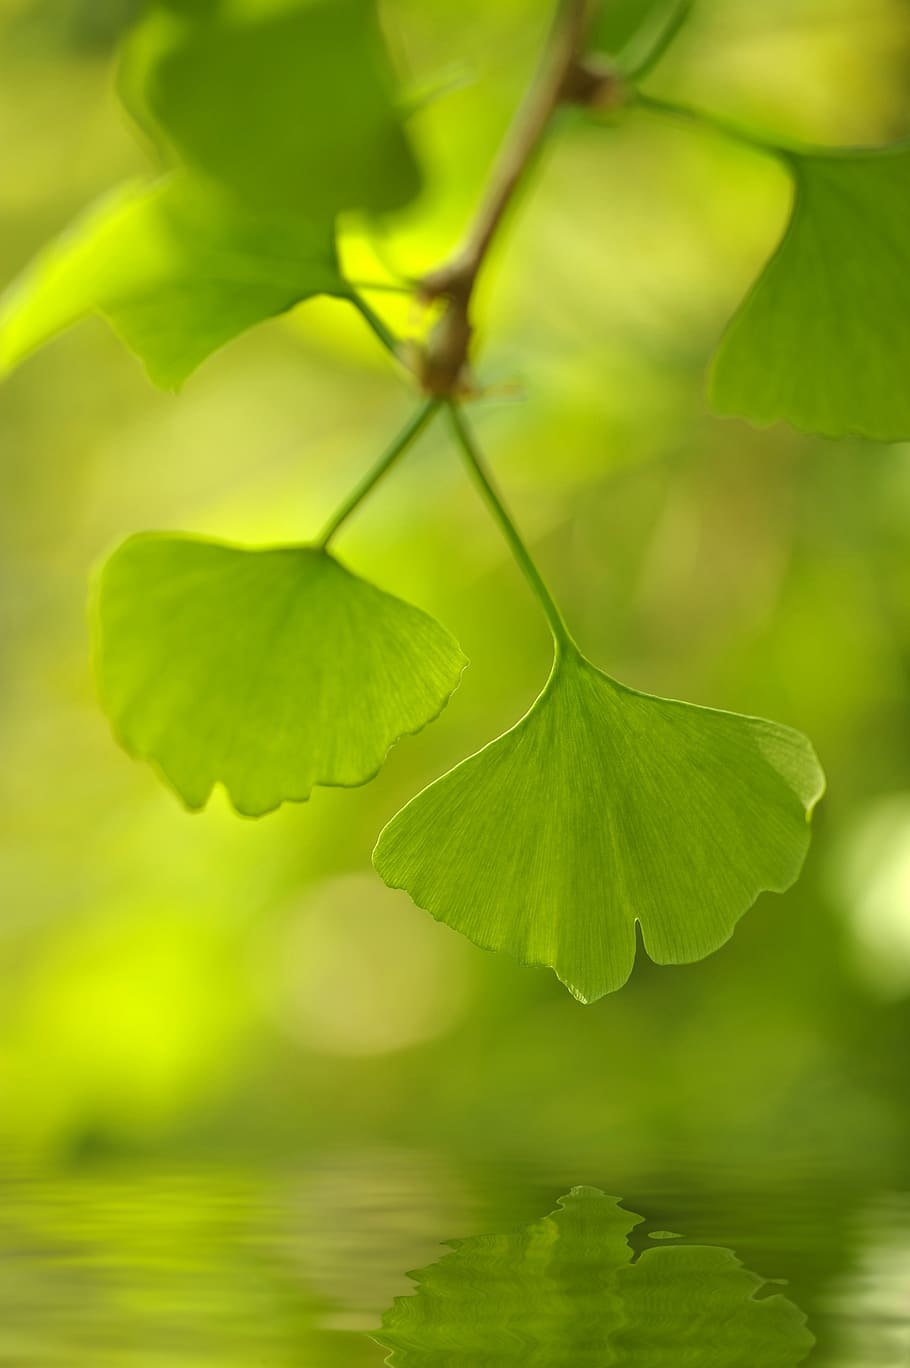 ginkgo, tree, leaves, mirroring, branch, deciduous tree, nature, garden, green, leaf